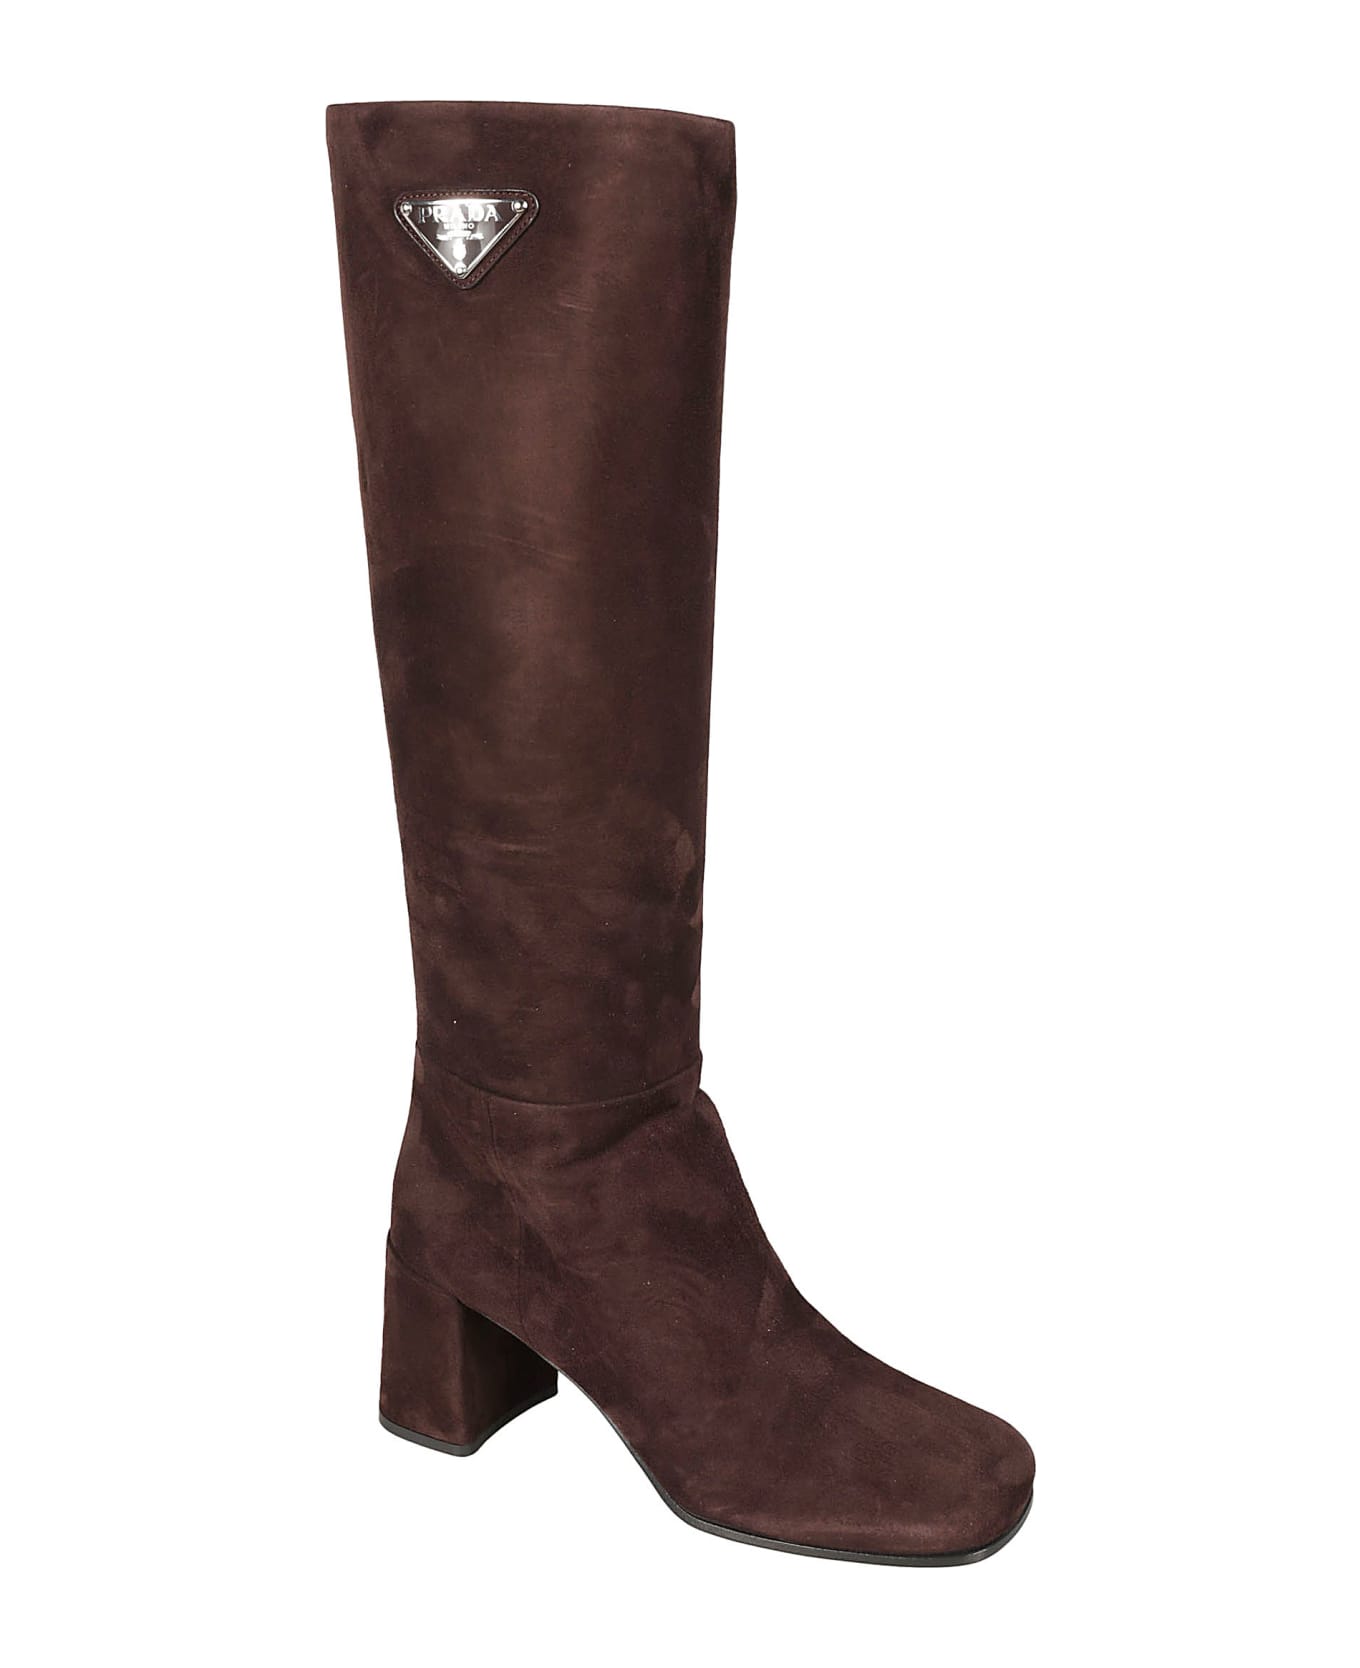 Prada Classic Over-the-knee Boots - Brown